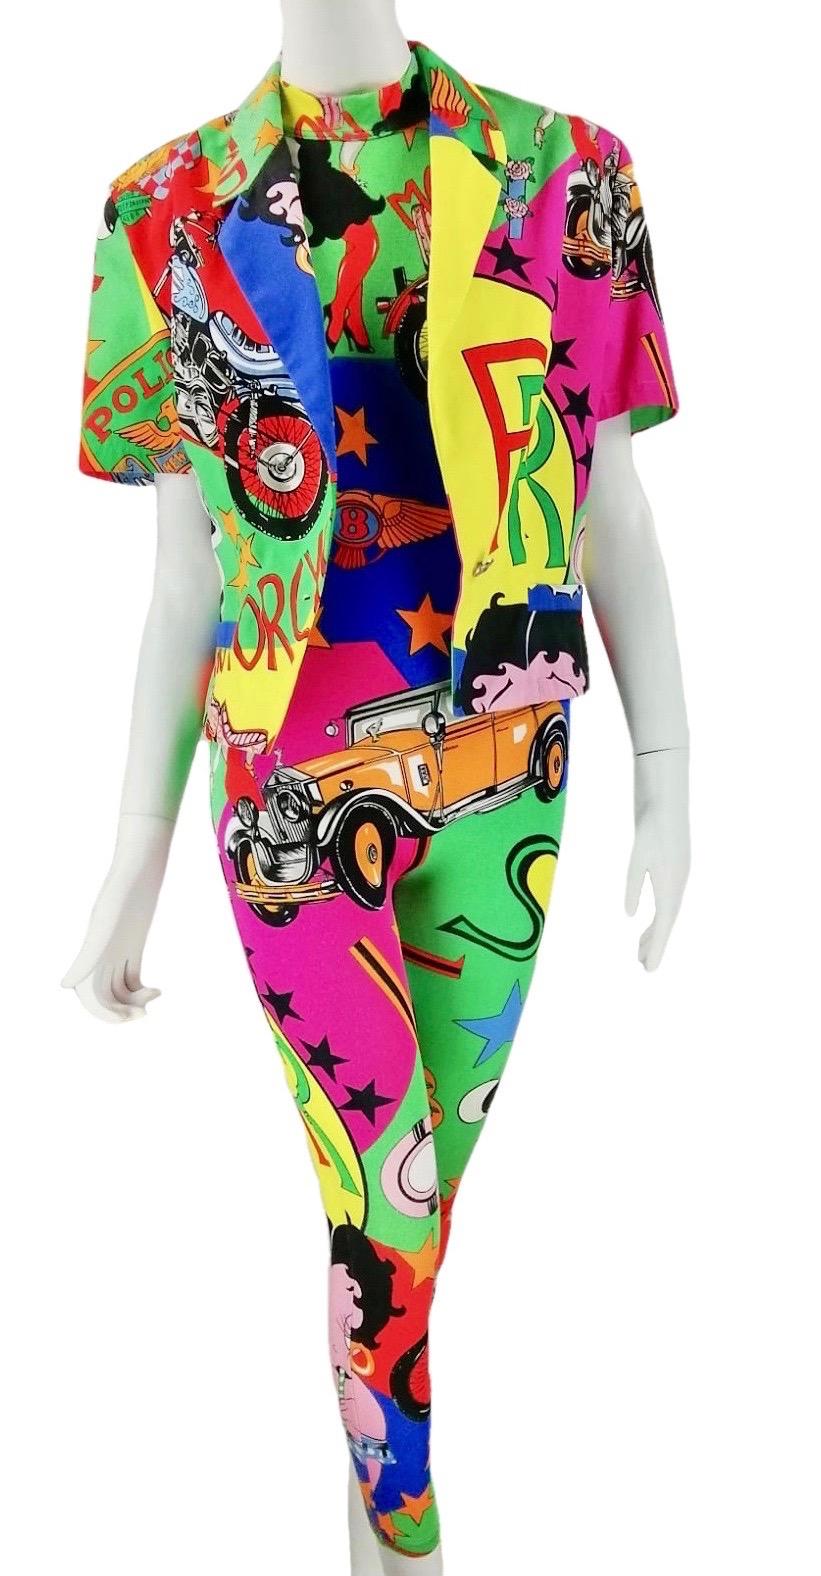 VERSACE JEANS COUTURE vintage 80s
Betty Boop cartoon pop art print catsuit jumpsuit and jacket
Cotton knit jumpsuit, mandarin collar, back zip
88% cotton
12% elastane
Size label not present
Made in Italy
Flat measures:
Total length cm. 114
Length